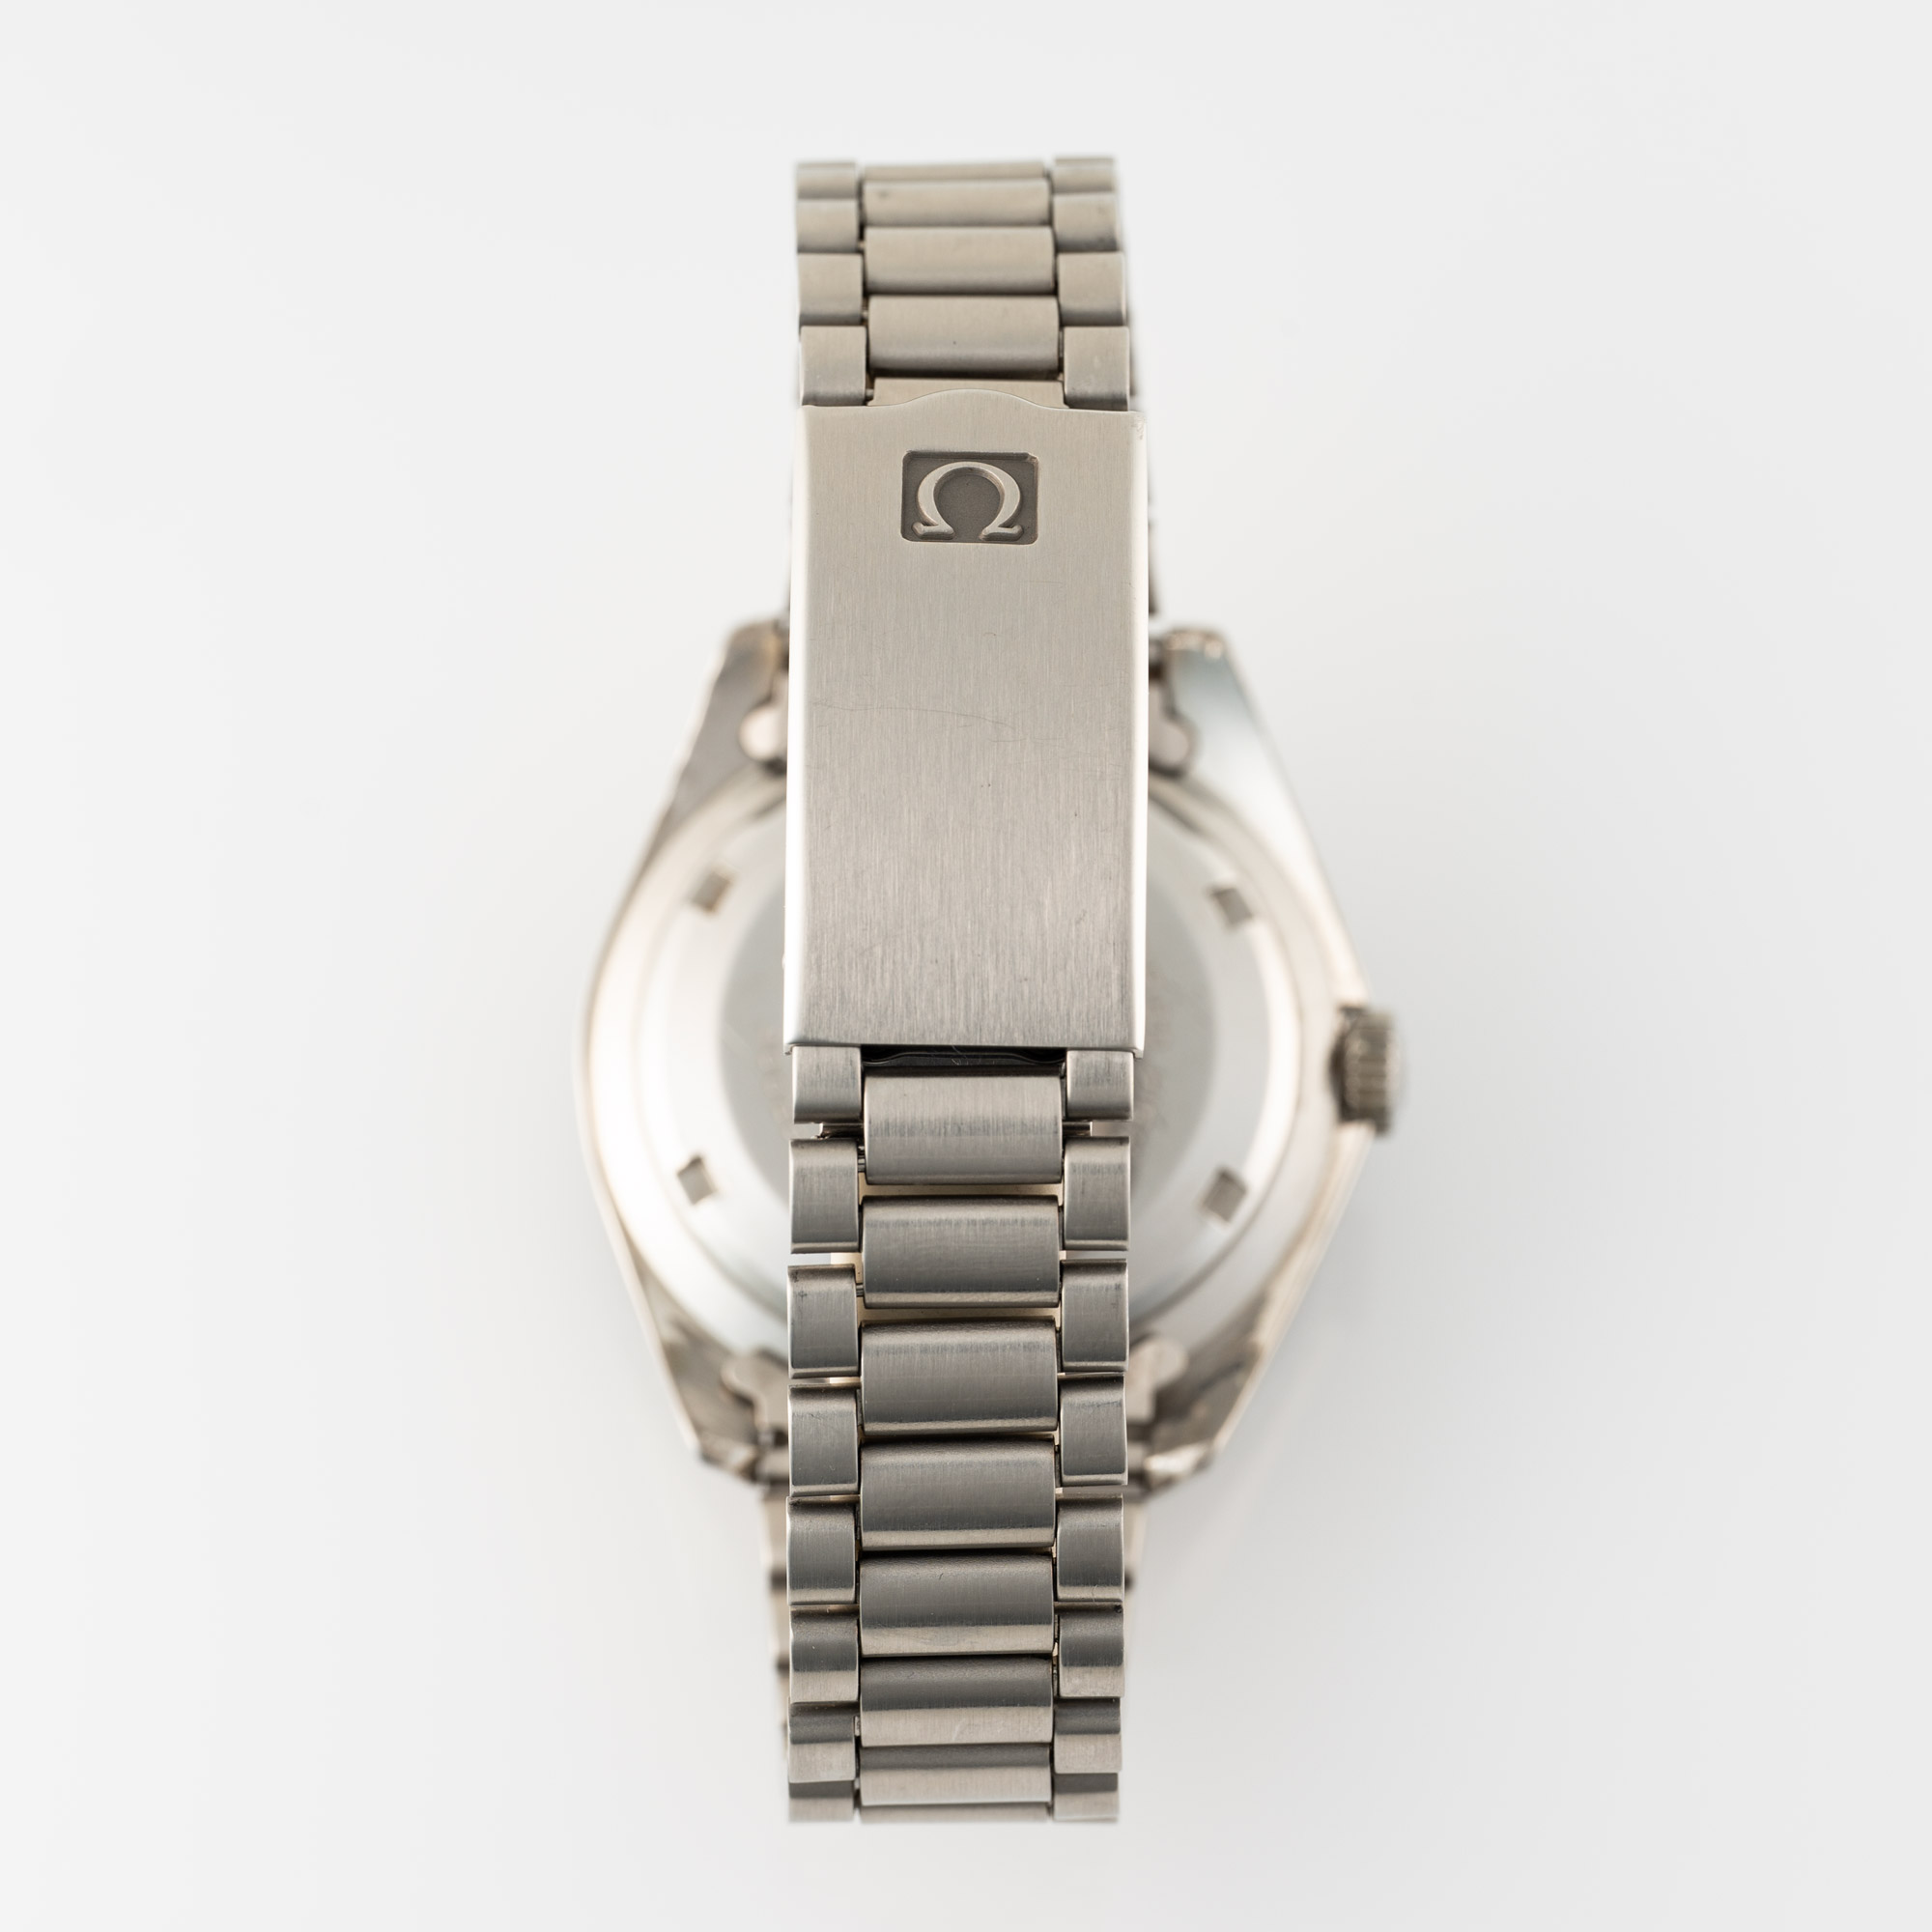 A GENTLEMAN'S SIZE STAINLESS STEEL OMEGA SEAMASTER 300 DIVERS BRACELET WATCH CIRCA 1965, REF. 165. - Image 8 of 10